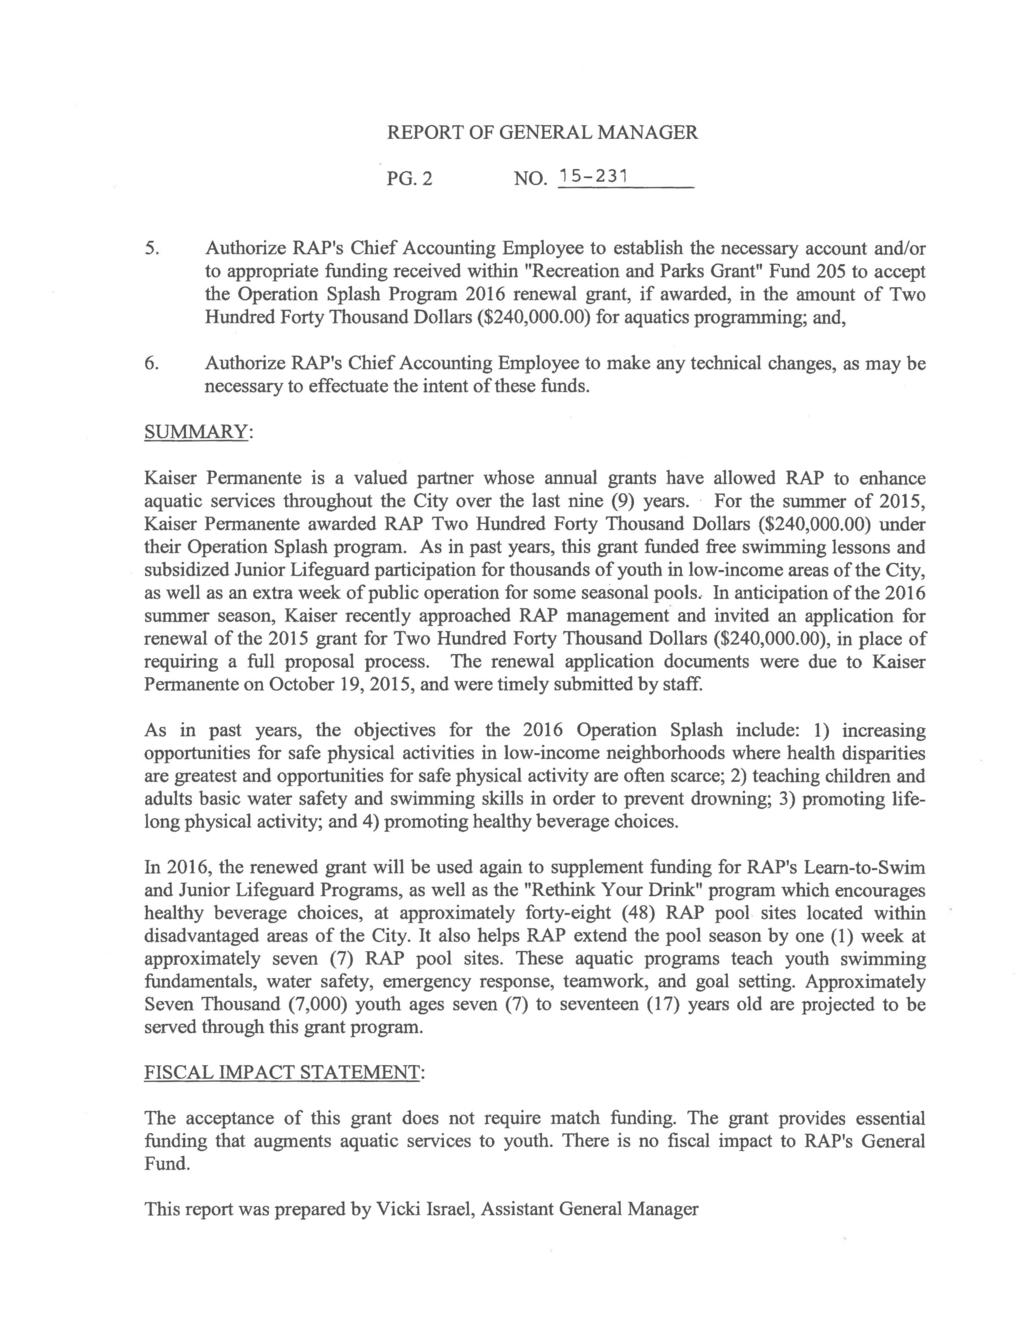 REPORT OF GENERAL MANAGER PG. 2 NO. 15-231 5.